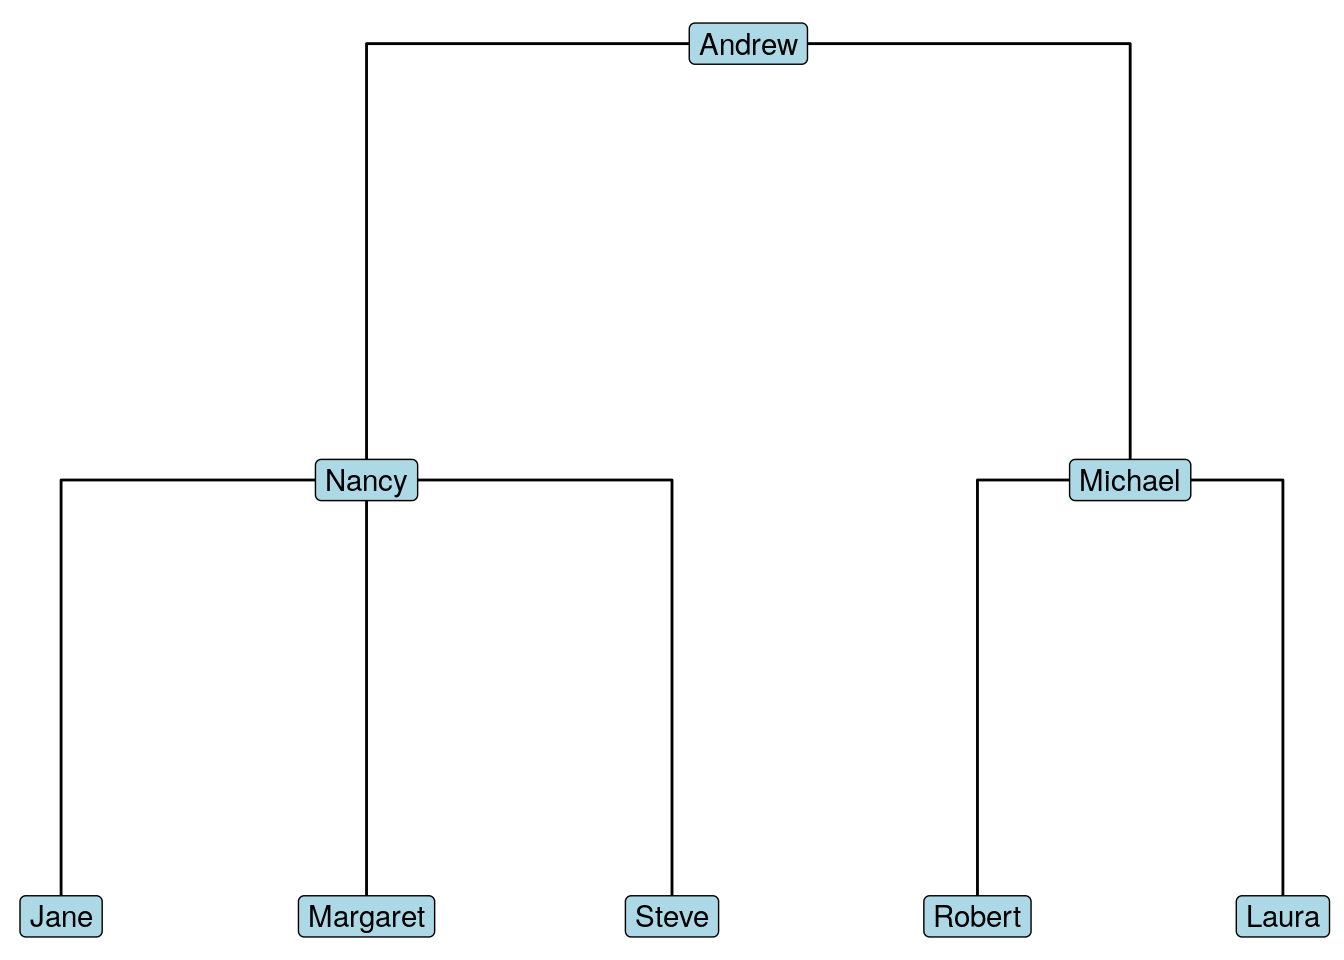 Management hierarchy of Chinook as a tree (dendrogram)